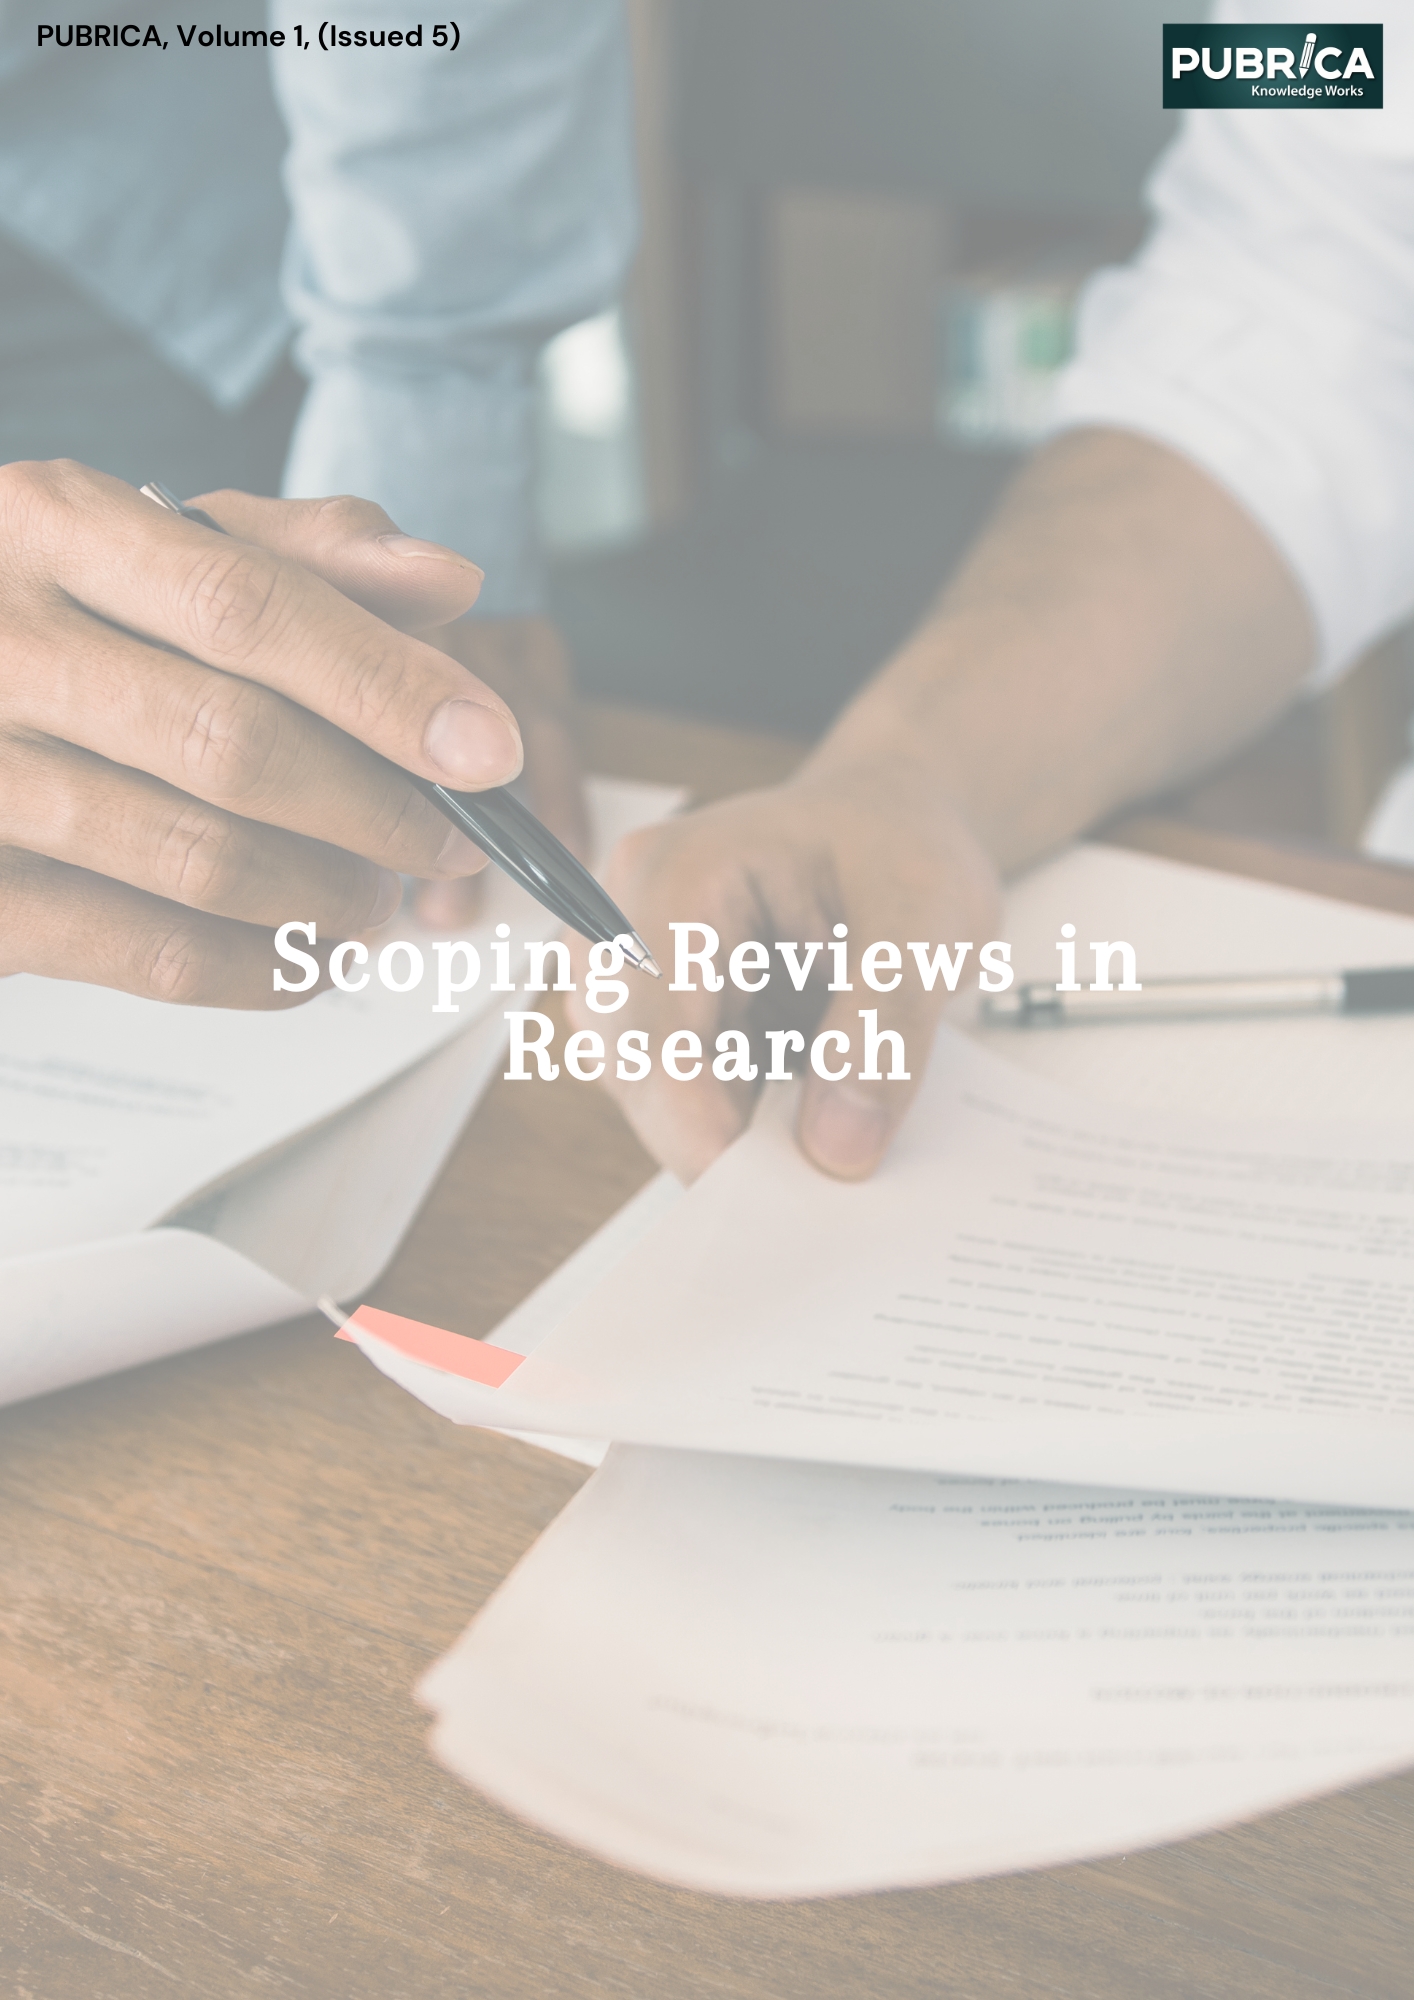 Scoping Reviews in Research